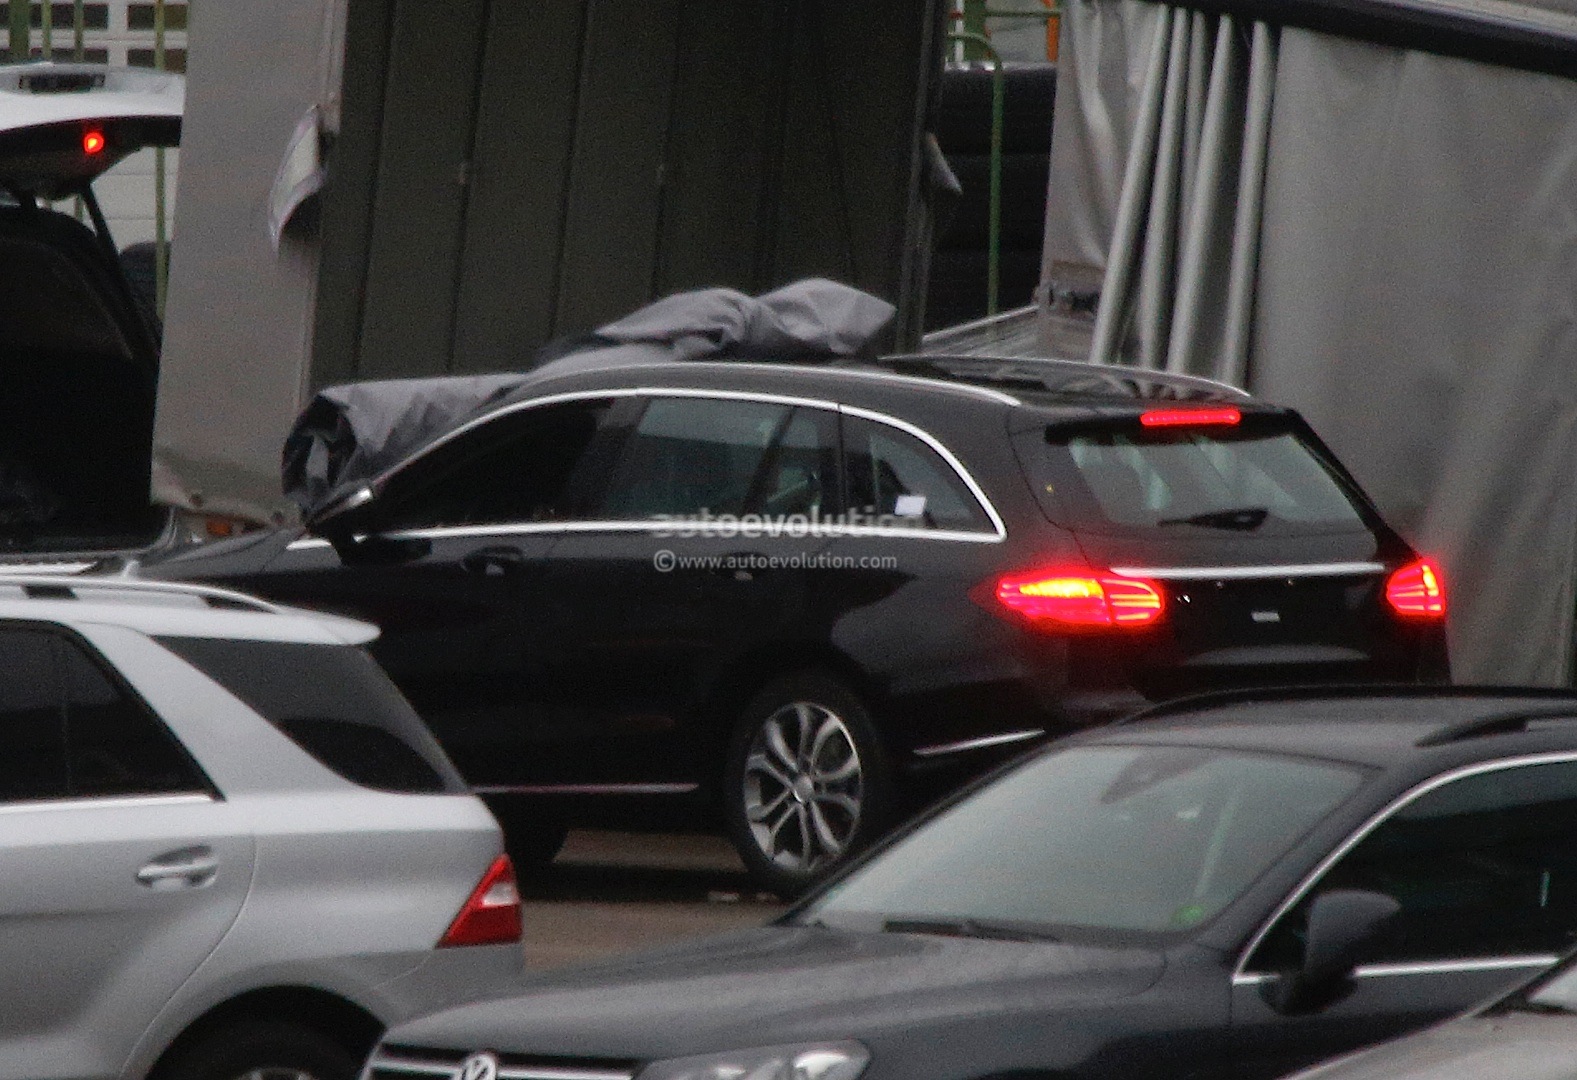 2014 - [Mercedes] Classe C [W205- S205] - Page 20 2015-c-class-wagon-s205-spied-completely-undisguised-photo-gallery-1080p-2